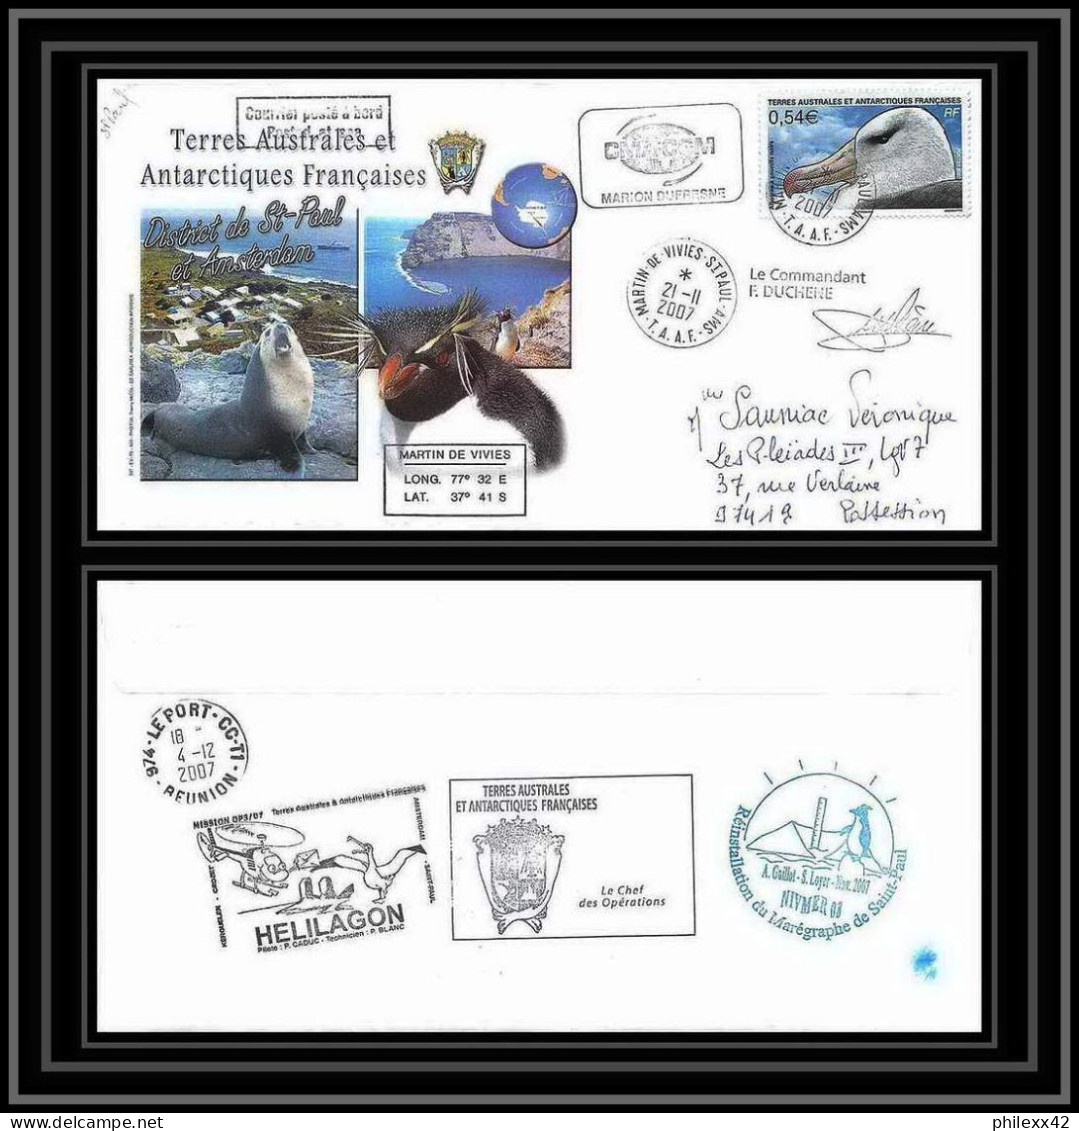 2727 Helilagon Terres Australes TAAF Lettre Cover Dufresne 2 Signé Signed Marégraphe N°466 21/11/2007 St Paul - Helicopters